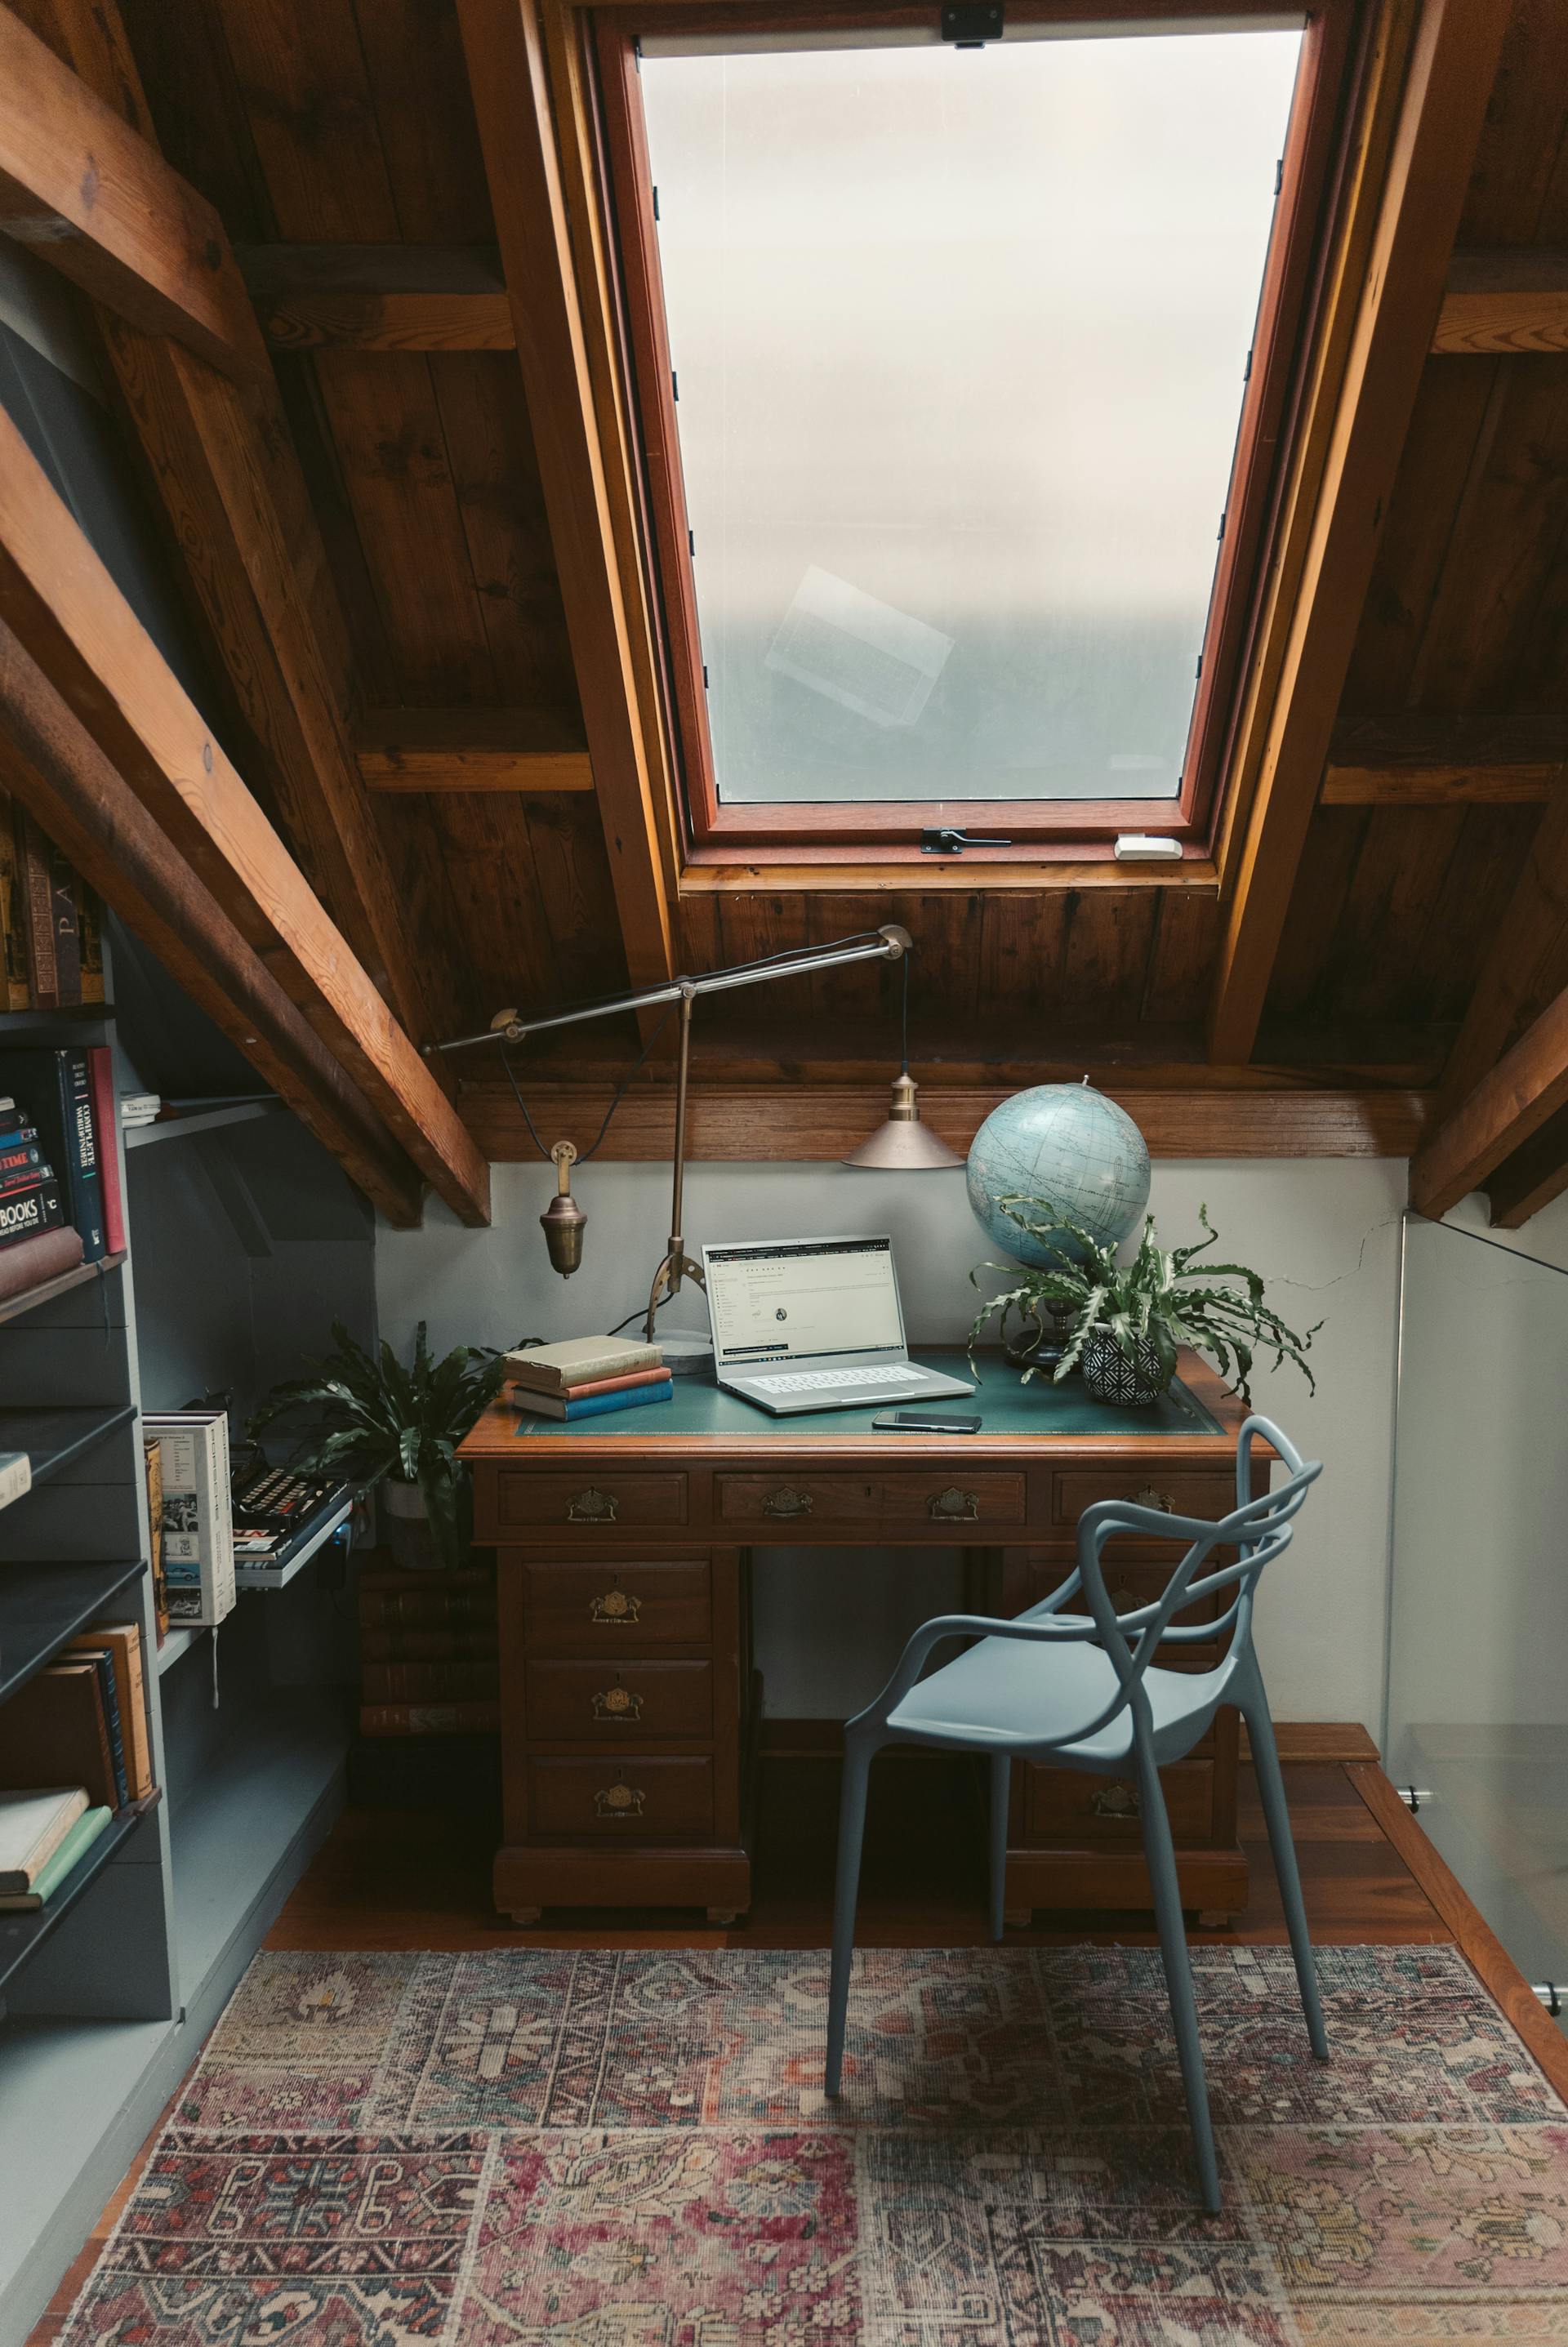 A study room in the attic | Source: Pexels